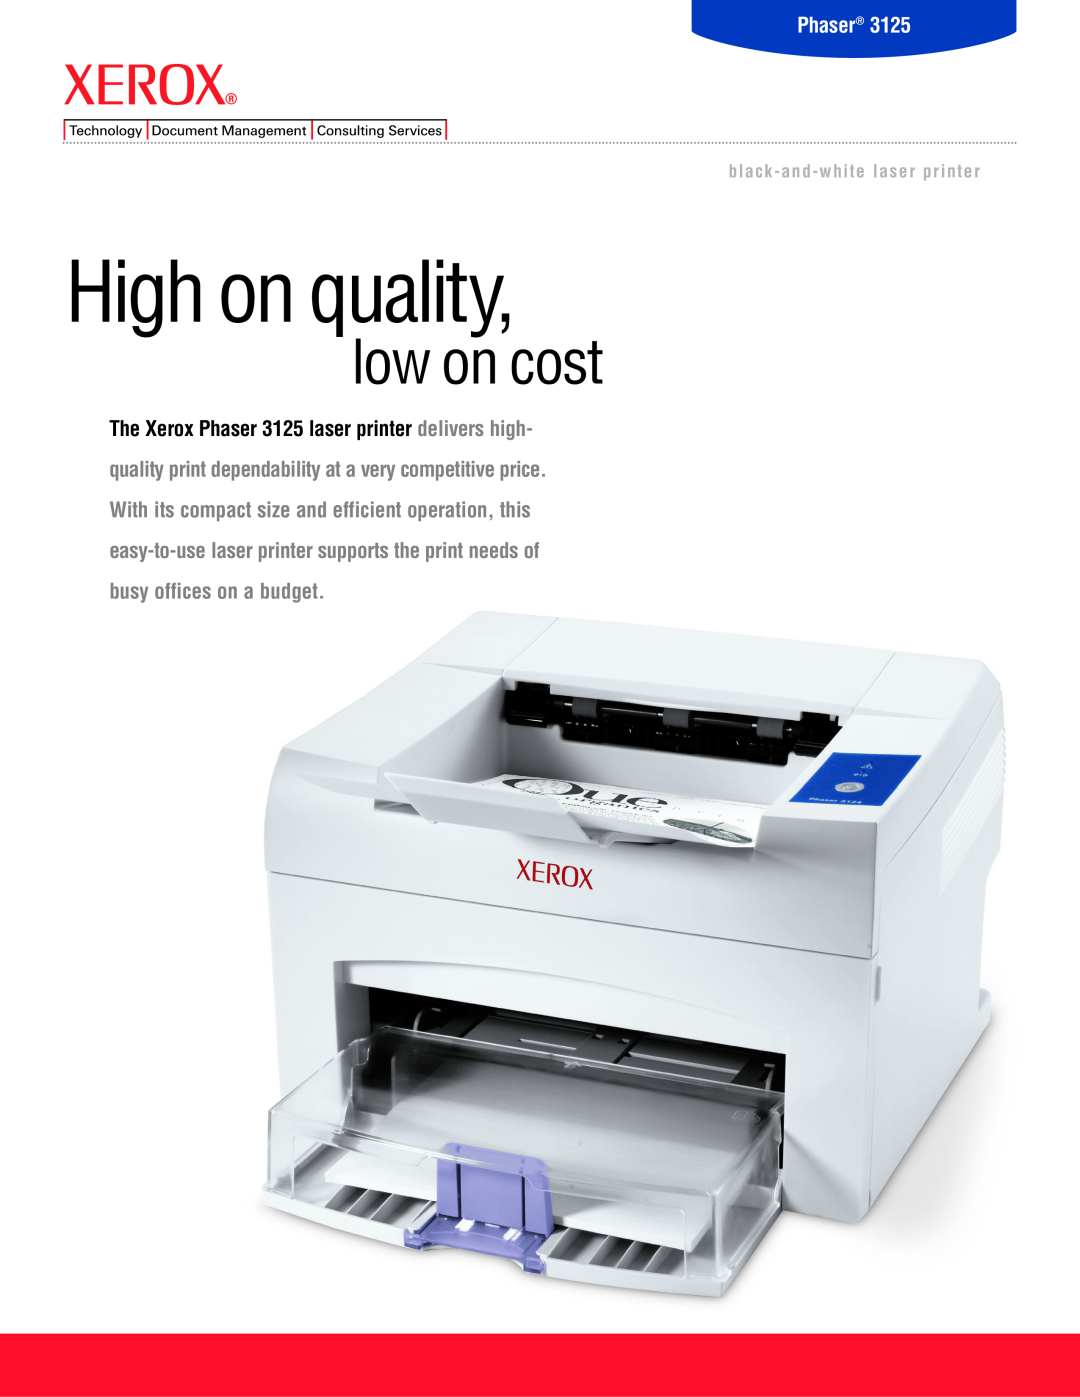 Xerox 3125 manual Phaser, High on quality, low on cost, black-and-whitelaser printer 